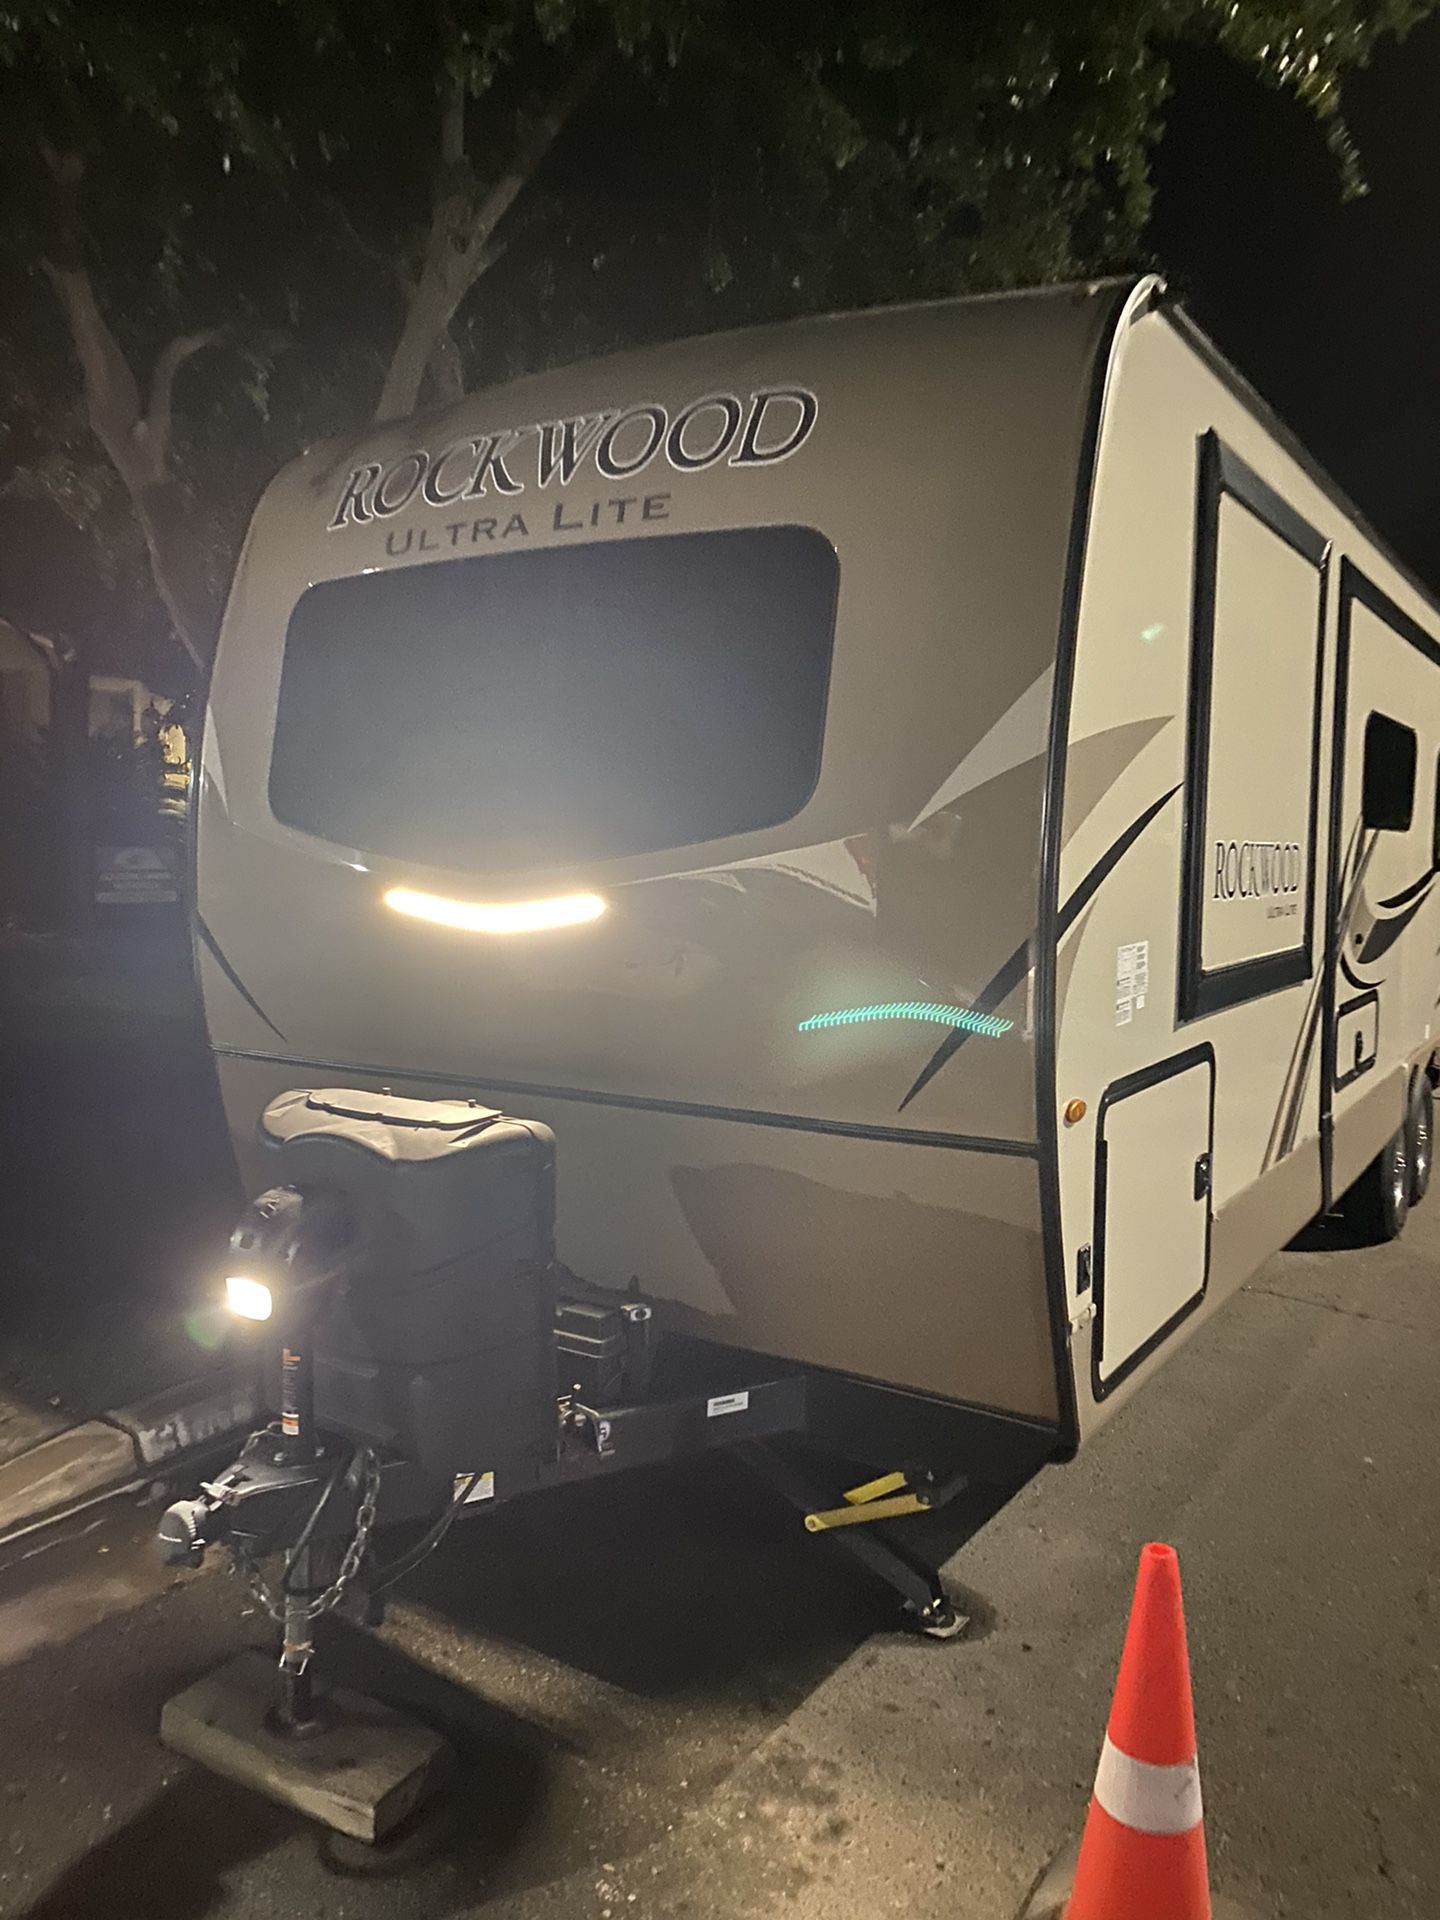 Photo 2019 Rockwood ultra light in excellent condition